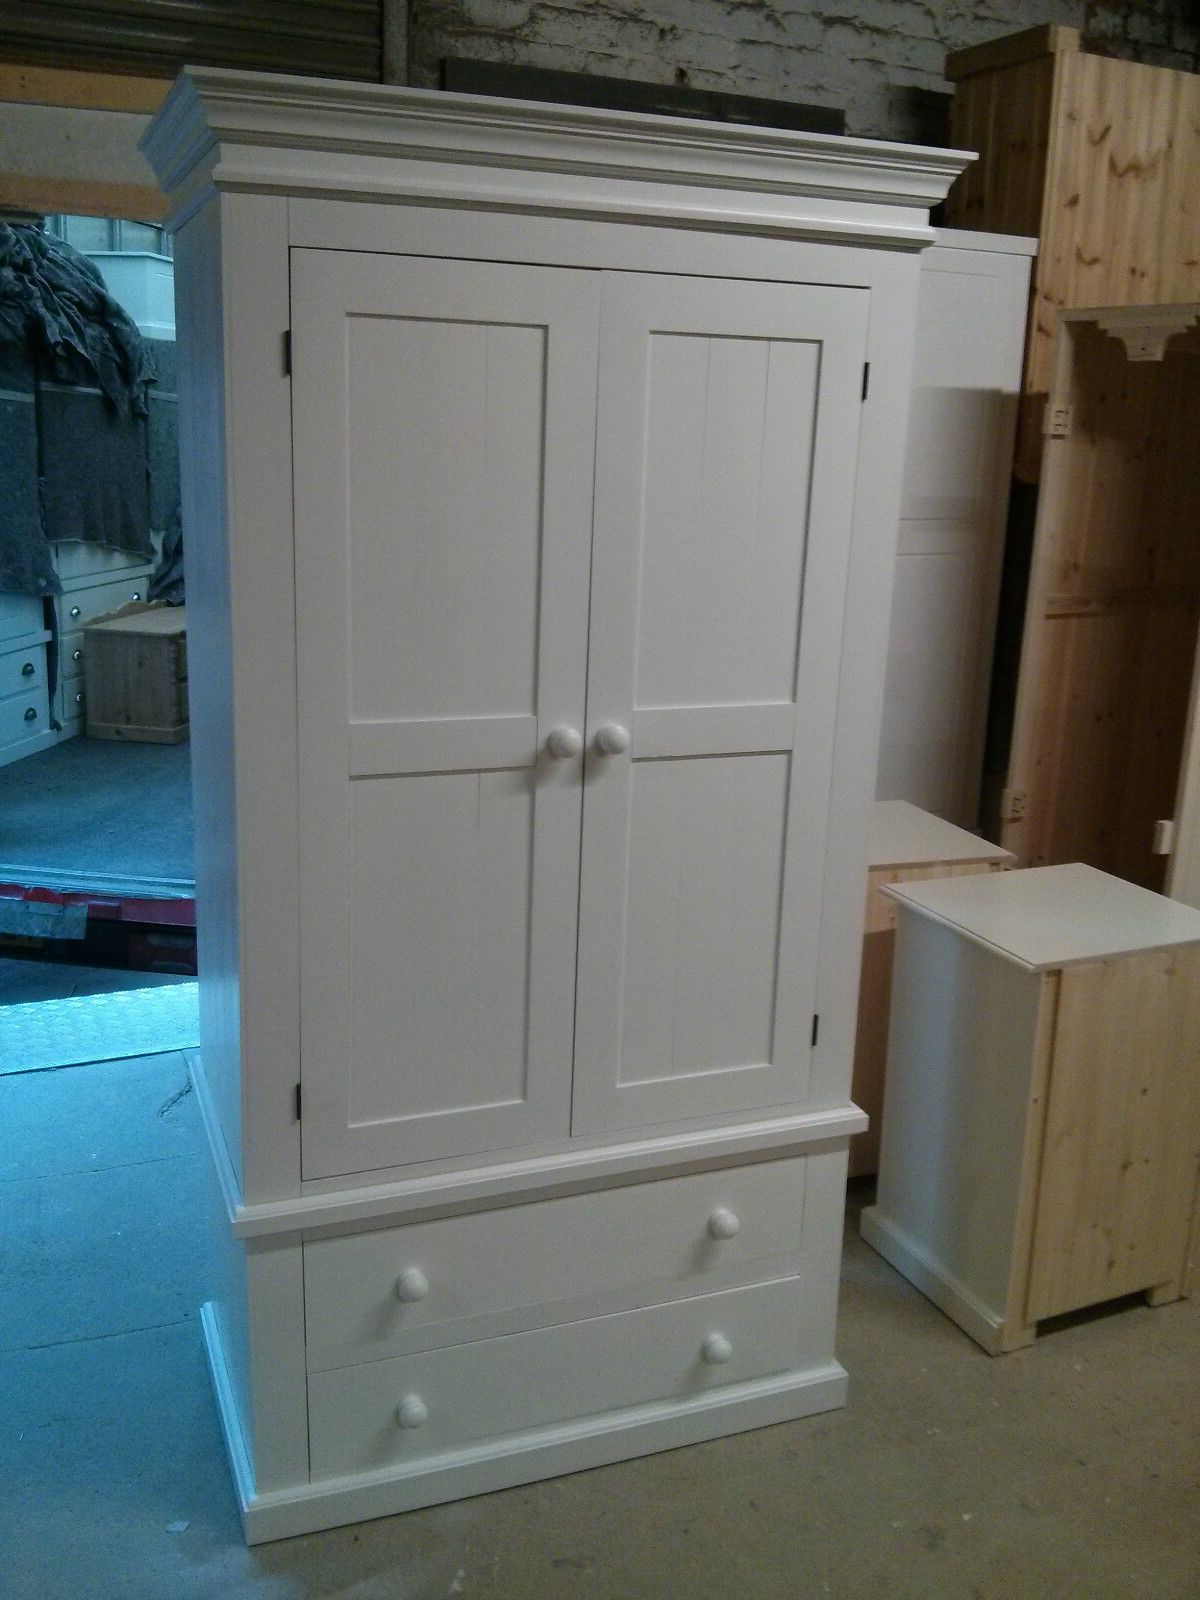 Pine Victorian Gents 2 Drawer Wardrobe Painted White Shabby Chic | Ebay Pertaining To Victorian Pine Wardrobes (View 11 of 20)